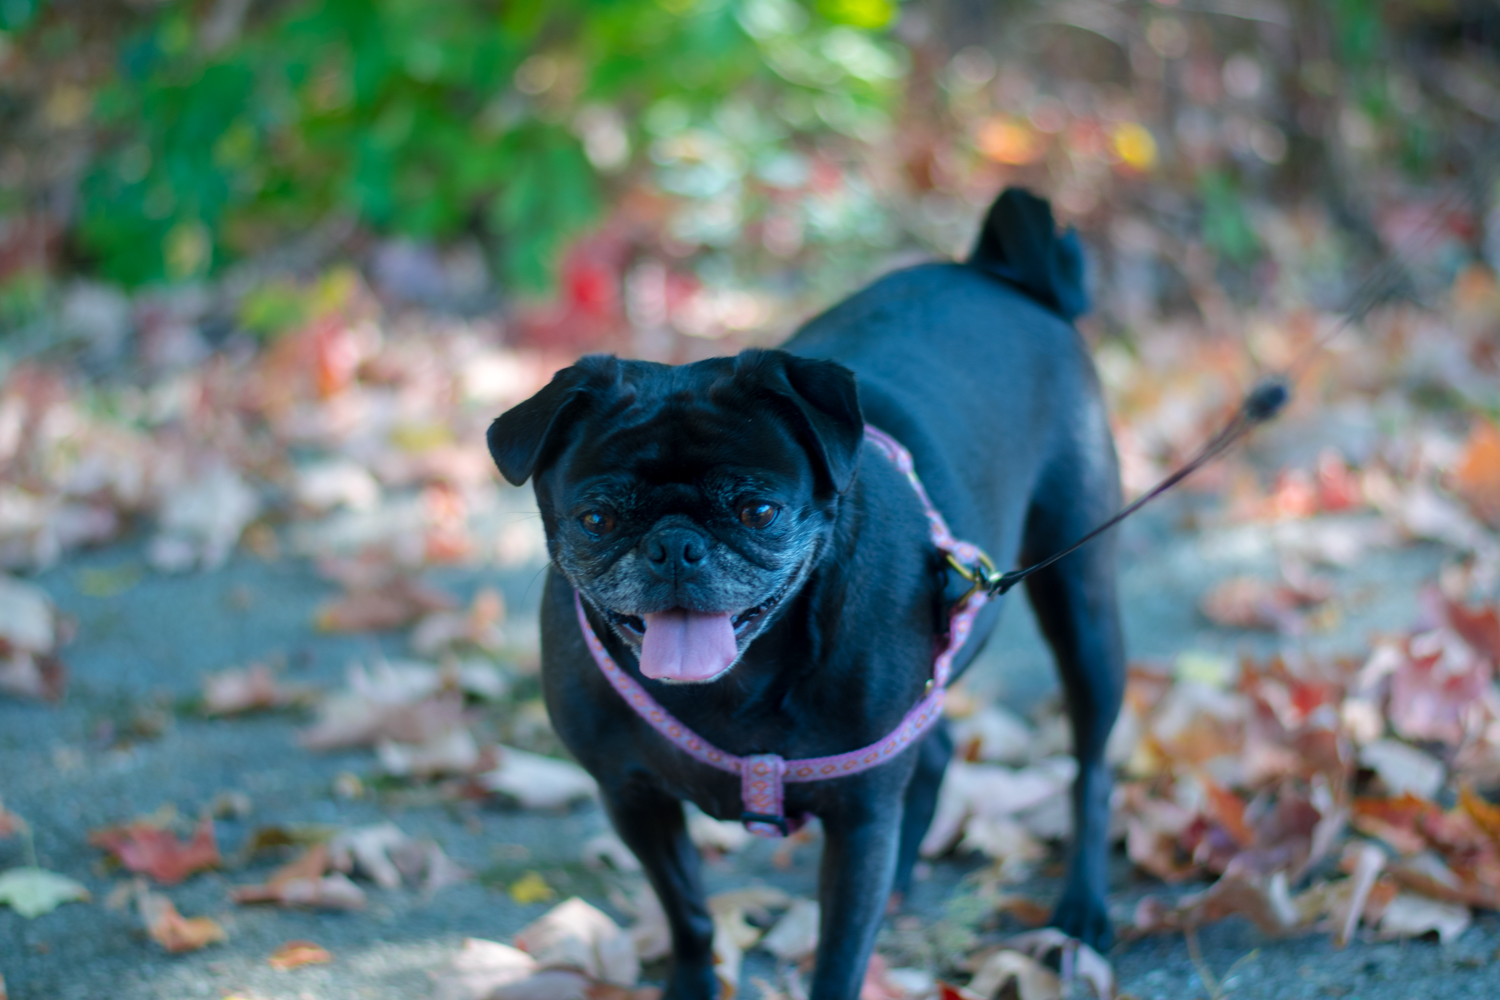 Tips for fall hiking with your dog. What should you bring on your next hike together.